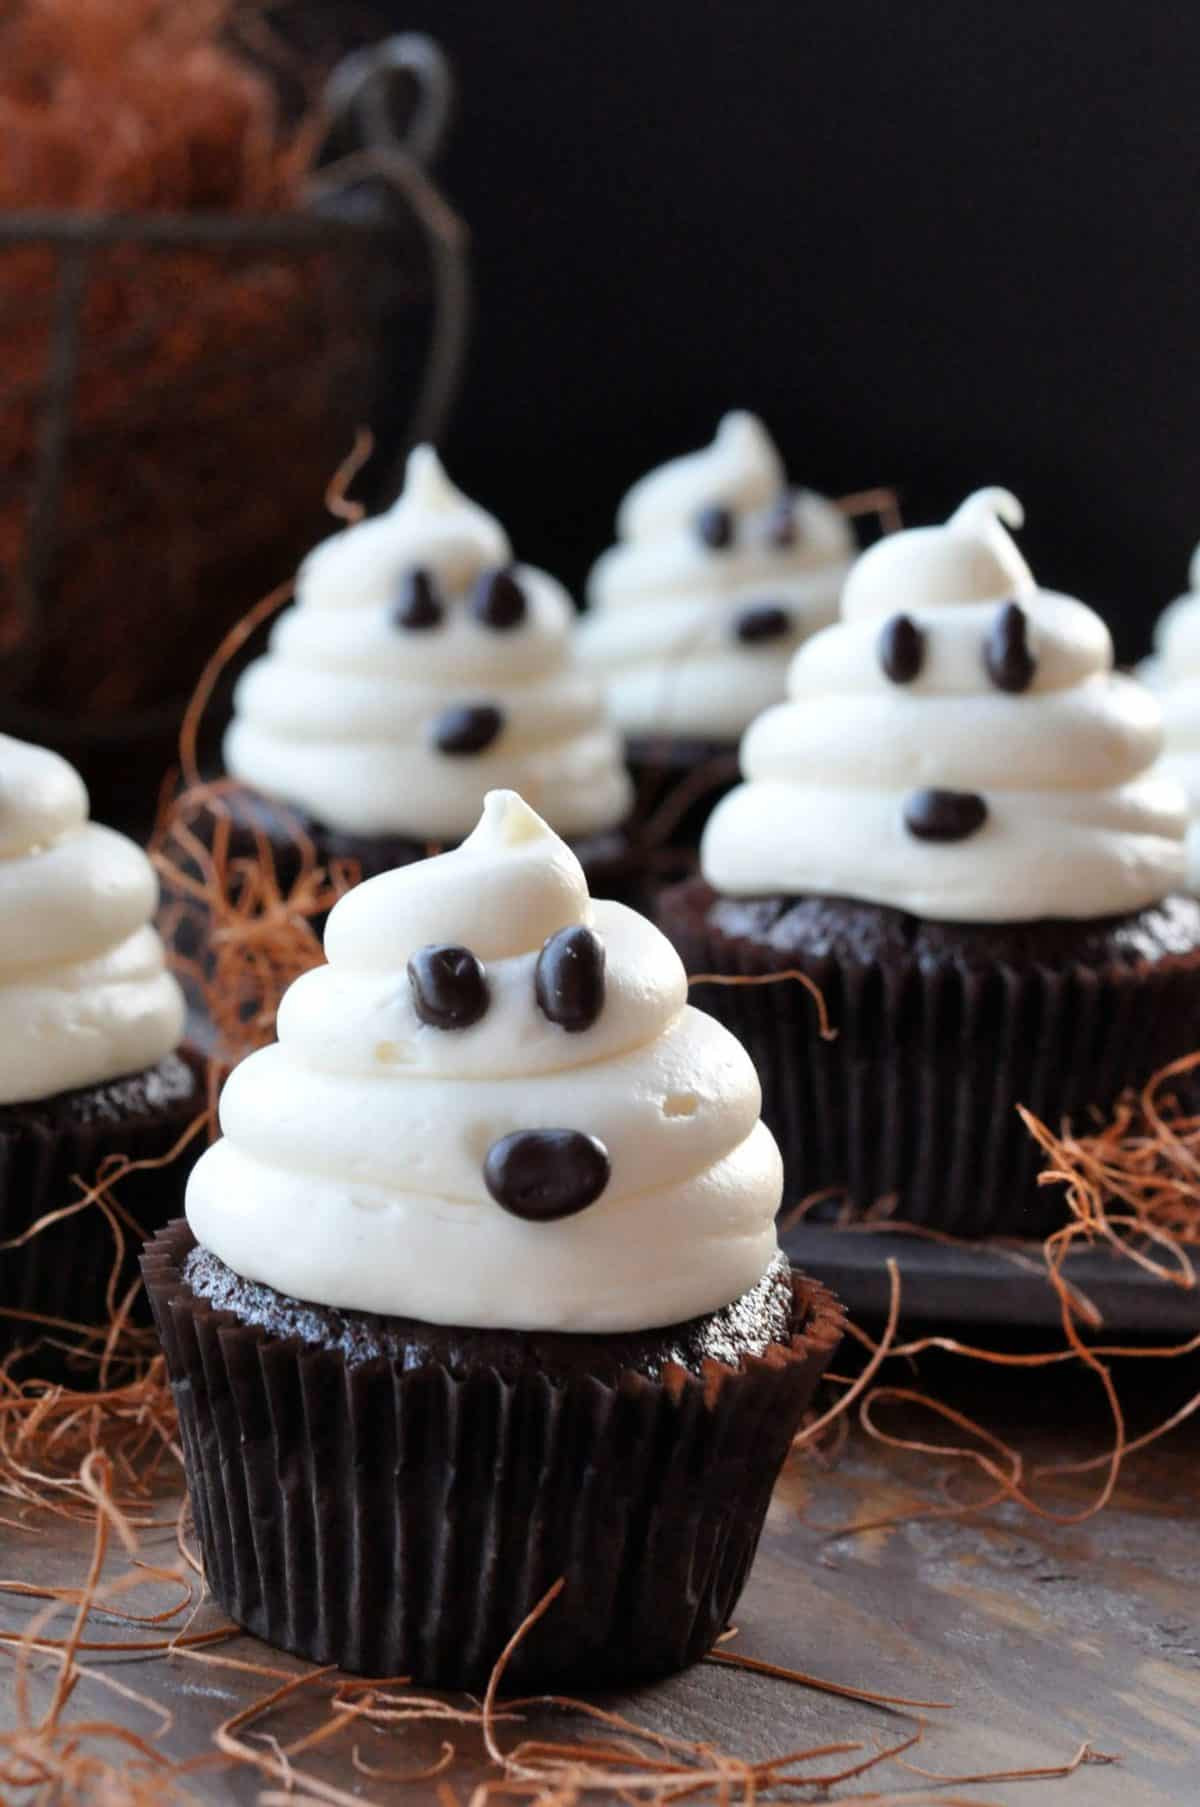 Cute Halloween Cupcakes
 Halloween Ghosts on Carrot Cake Recipe—Fast and Easy